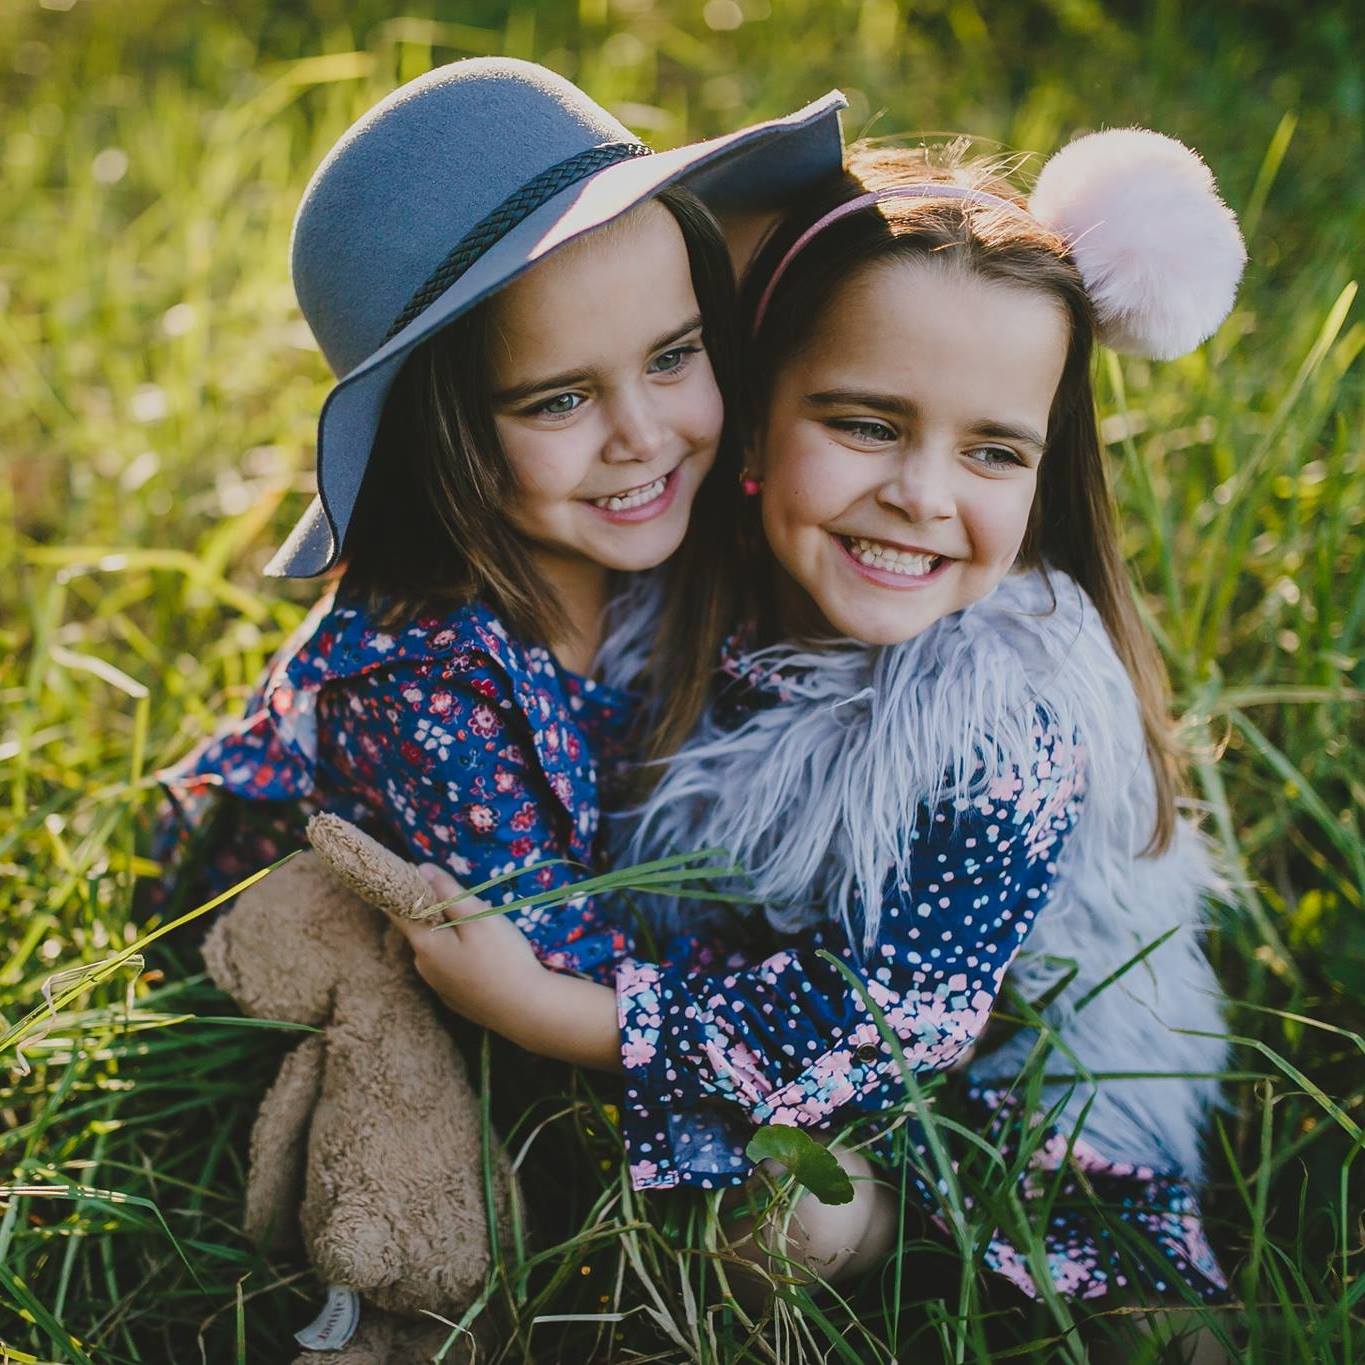 Photo taken by Central Coast photographer Kendell Tyne of two young girls hugging.